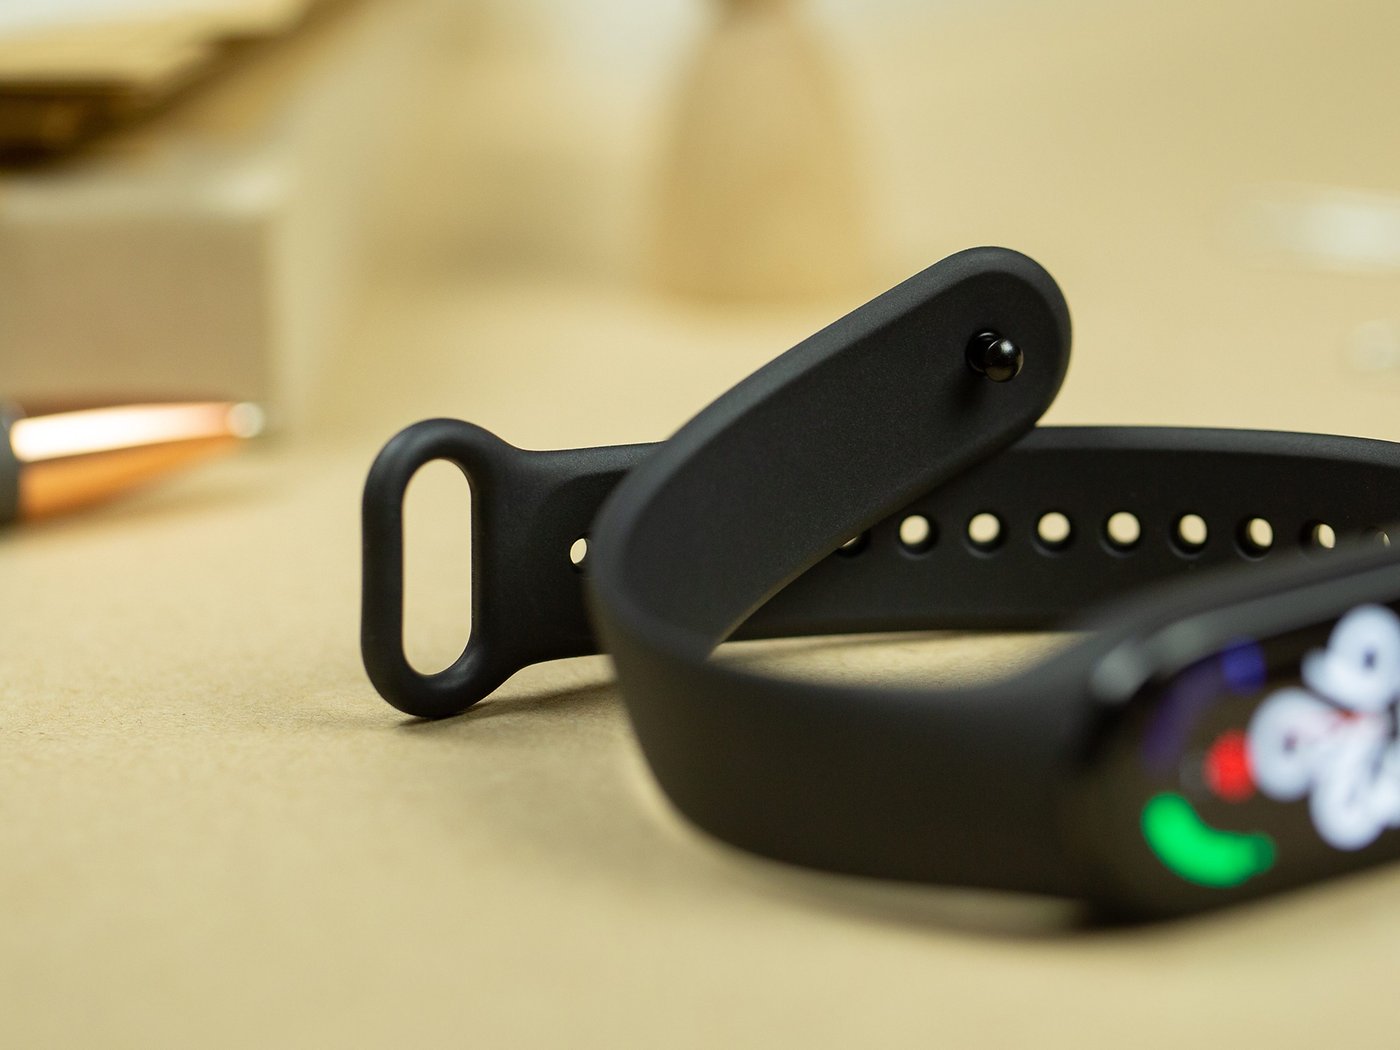 Xiaomi Mi Smart Band 5 Review: $50 Fitness Tracker With Stacks Of Features